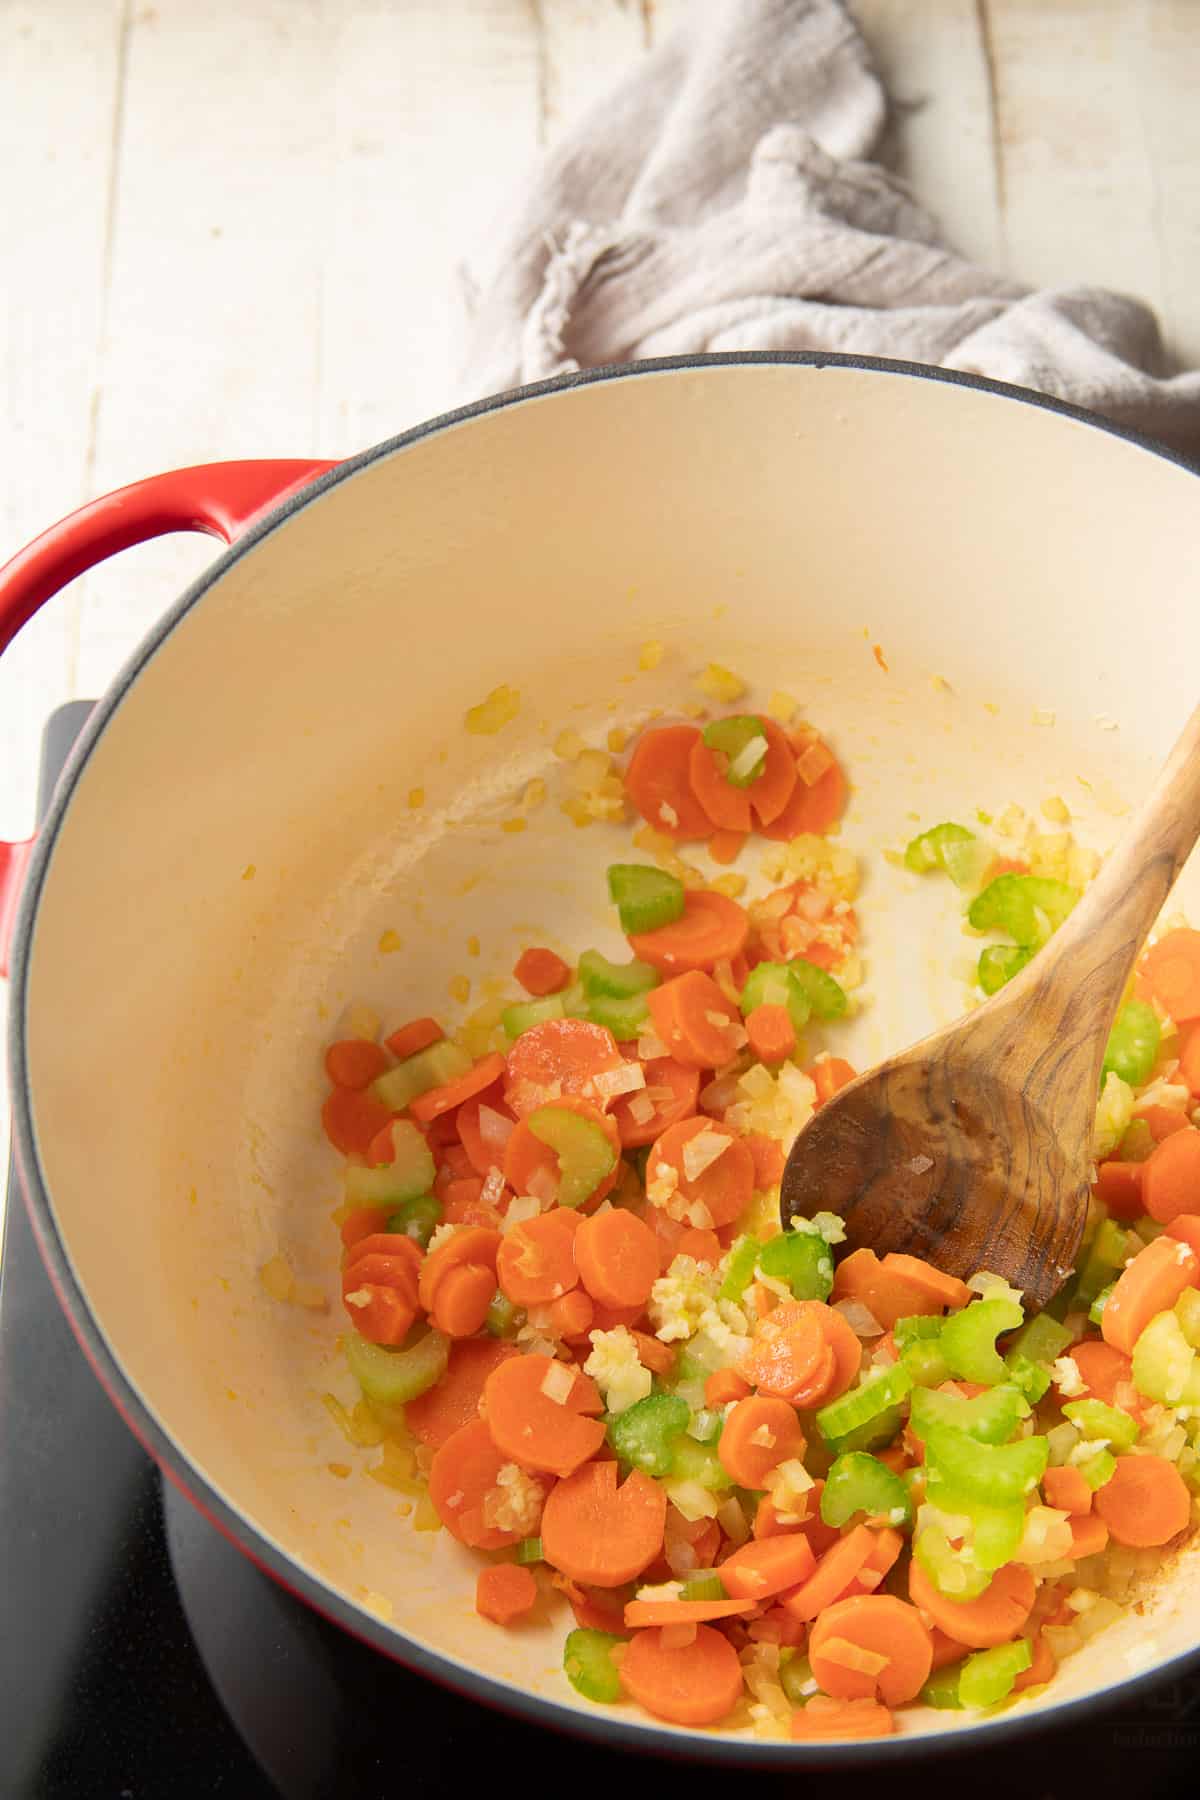 Celery, onions, carrots, and garlic cooking in a pot with a wooden spoon.